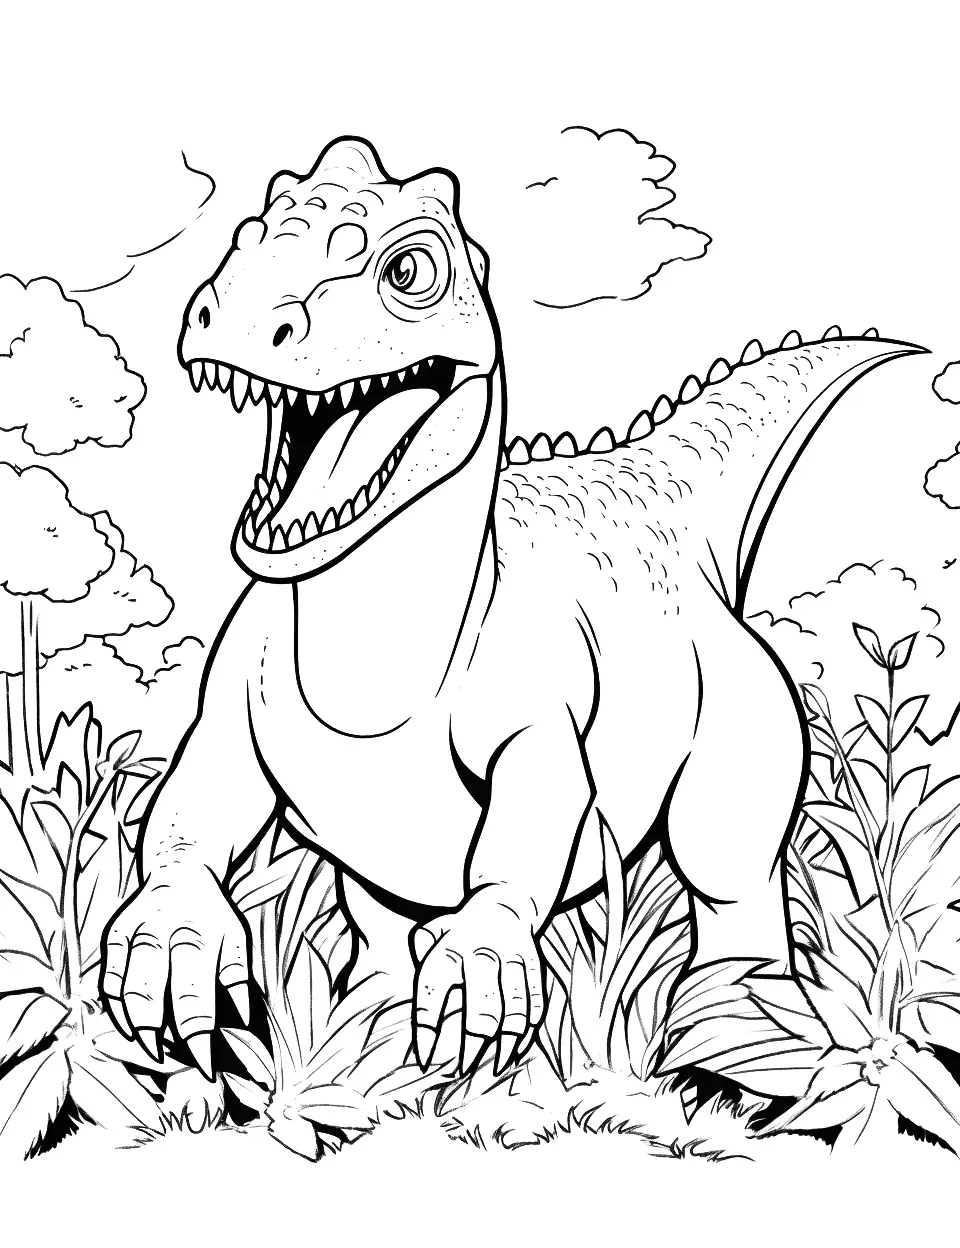 Carnotaurus Charge Coloring Page - A Carnotaurus charging through the underbrush.